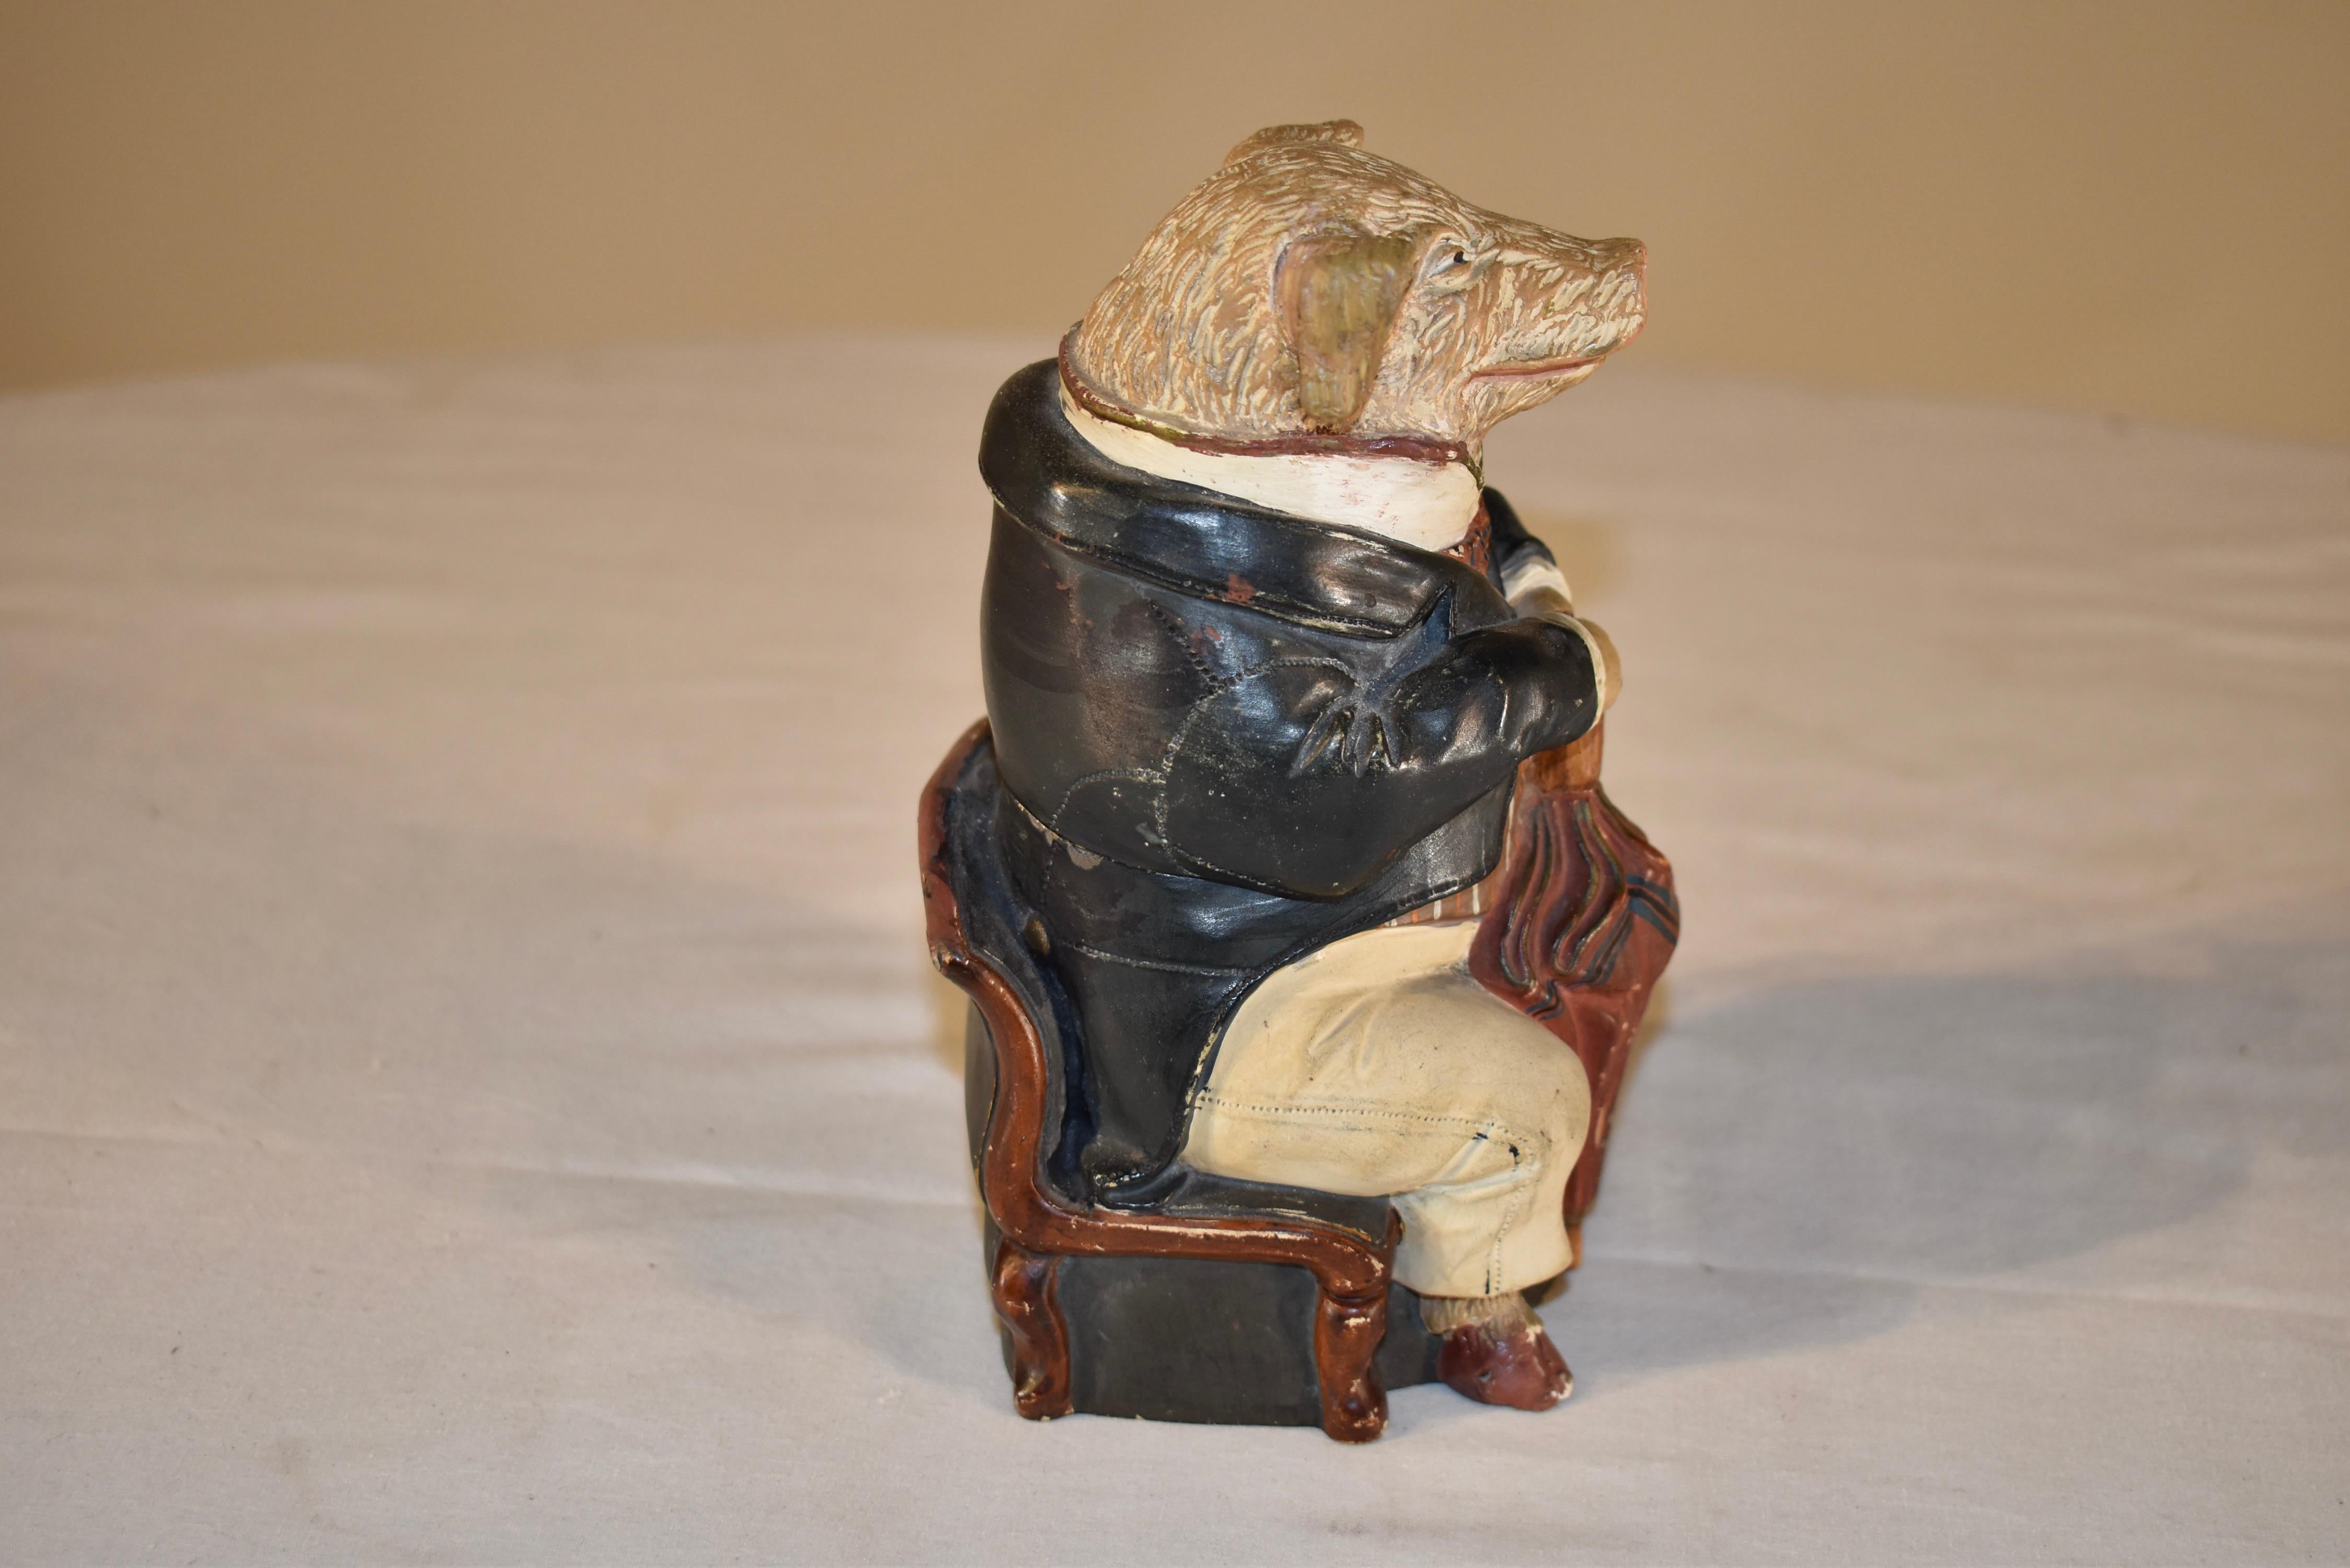 RARE 19th century signed Johann Maresh tobacco jar in the form of a gentleman pig. This is one of those wonderful tobacco boxes you look for to be the star of your collection. He is so whimsical seated with his umbrella! He has a plaid waistcoat and